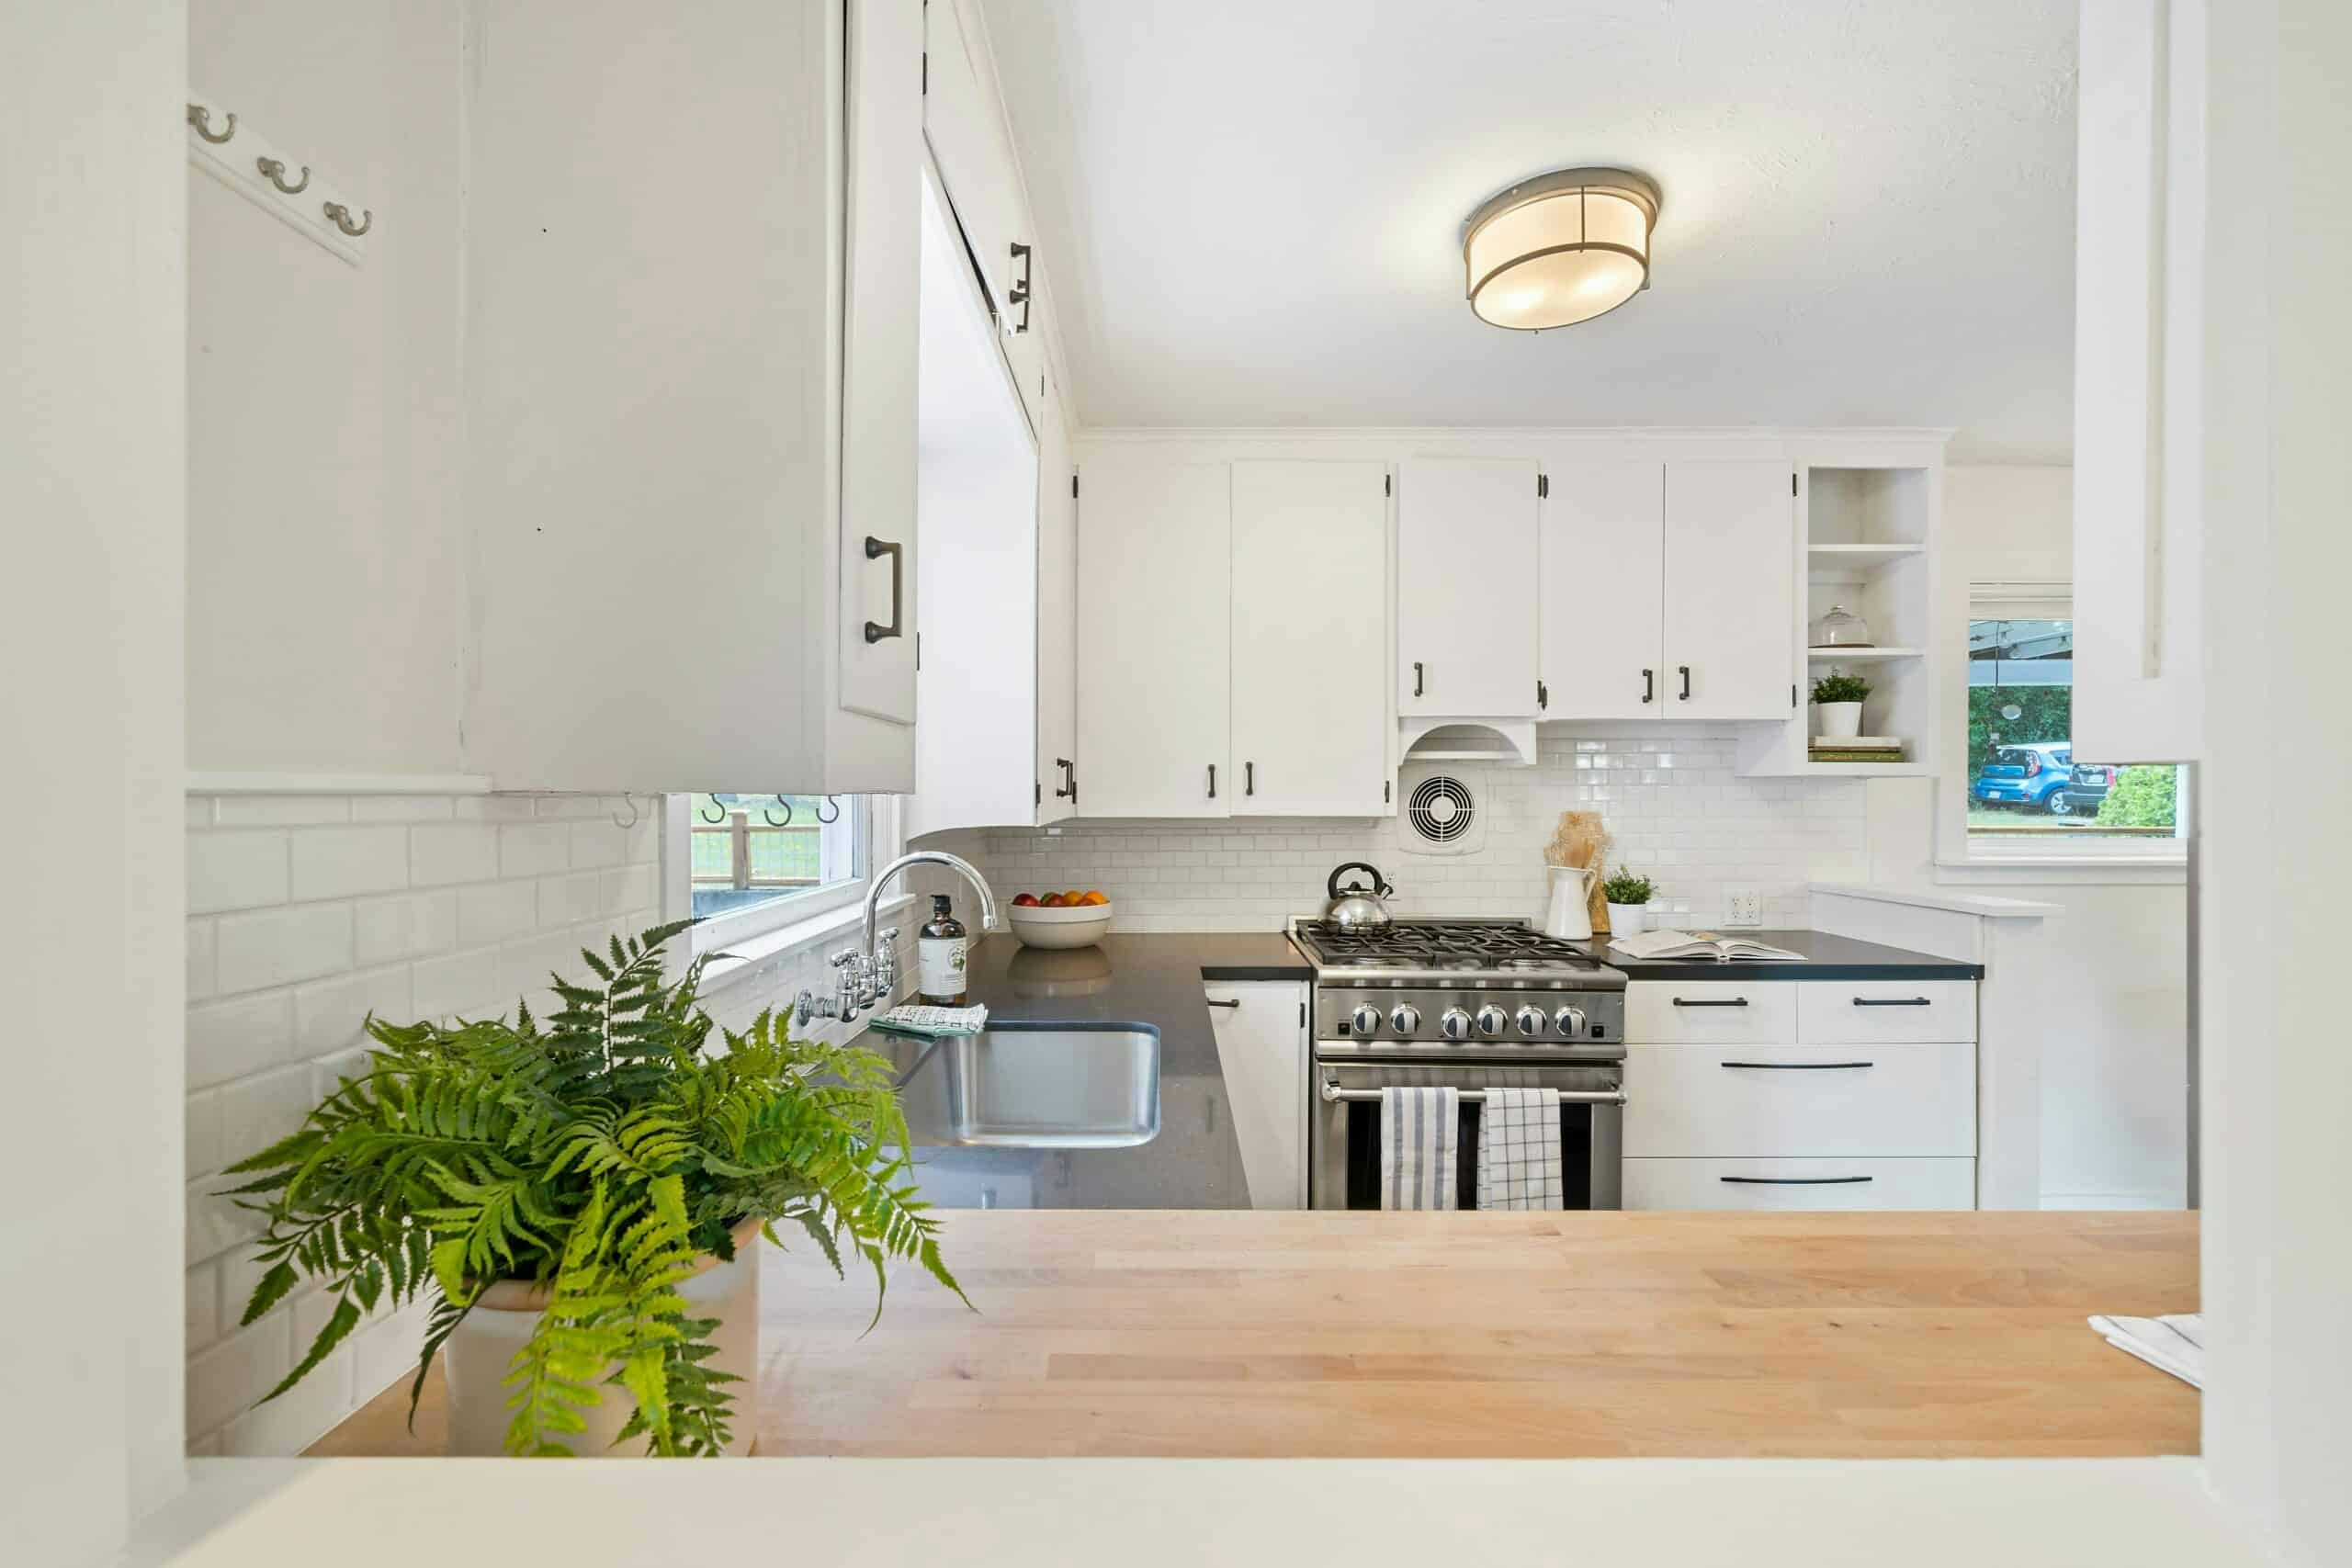 How to Make the Most of a Small Kitchen Space